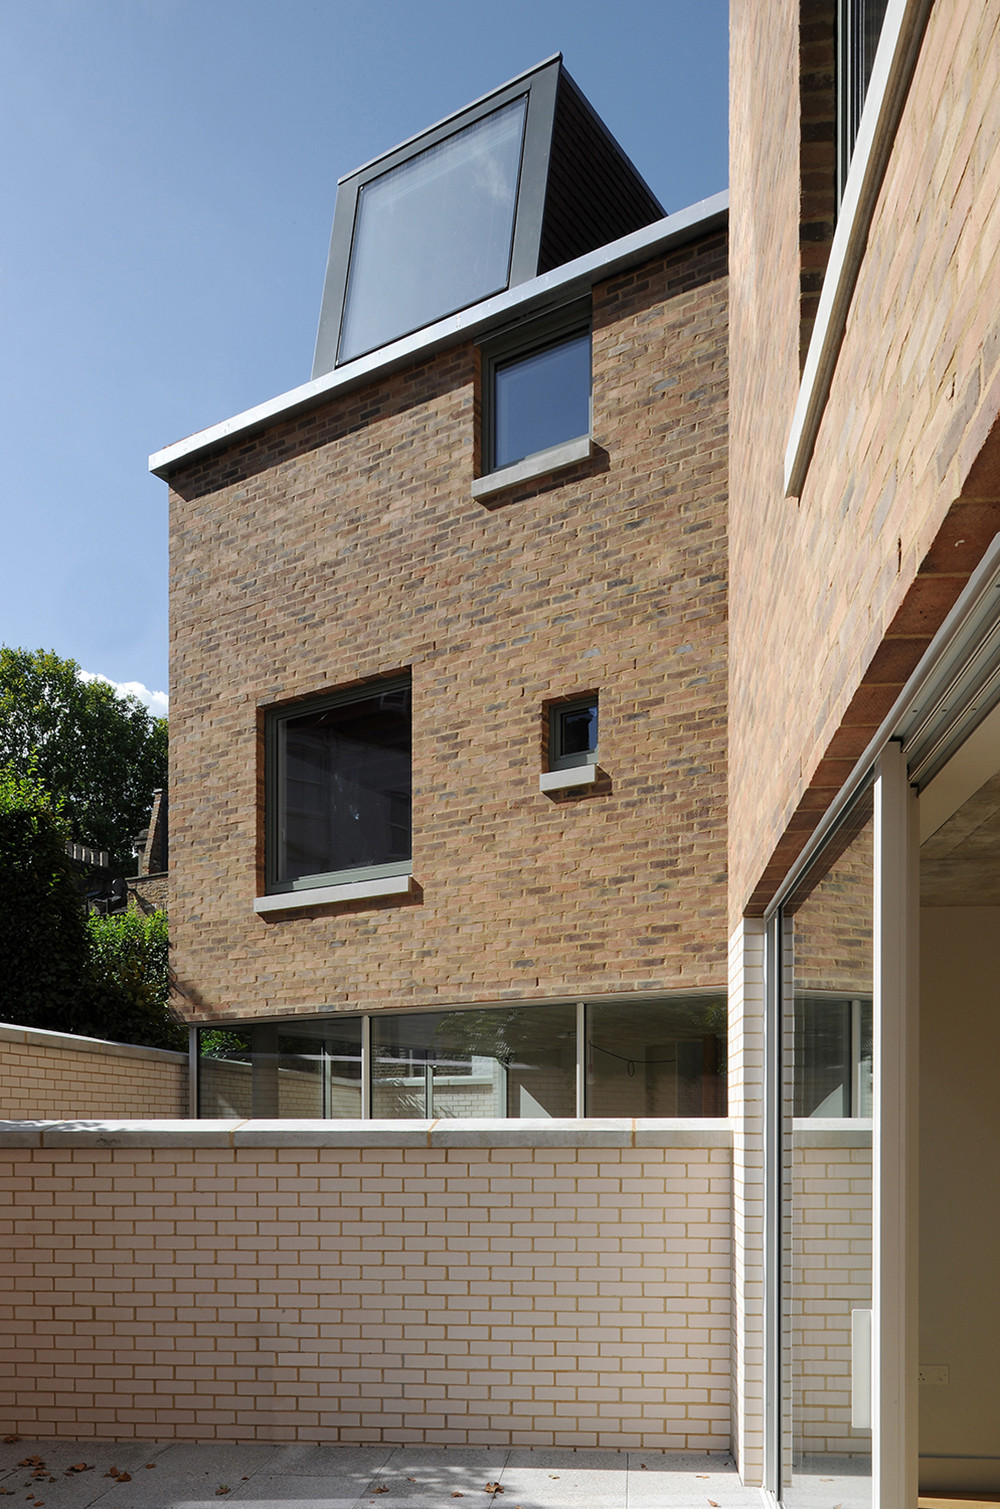 Moore Park Mews (London, SW6) by Stephen Taylor Architects. Photo: David Grandorge